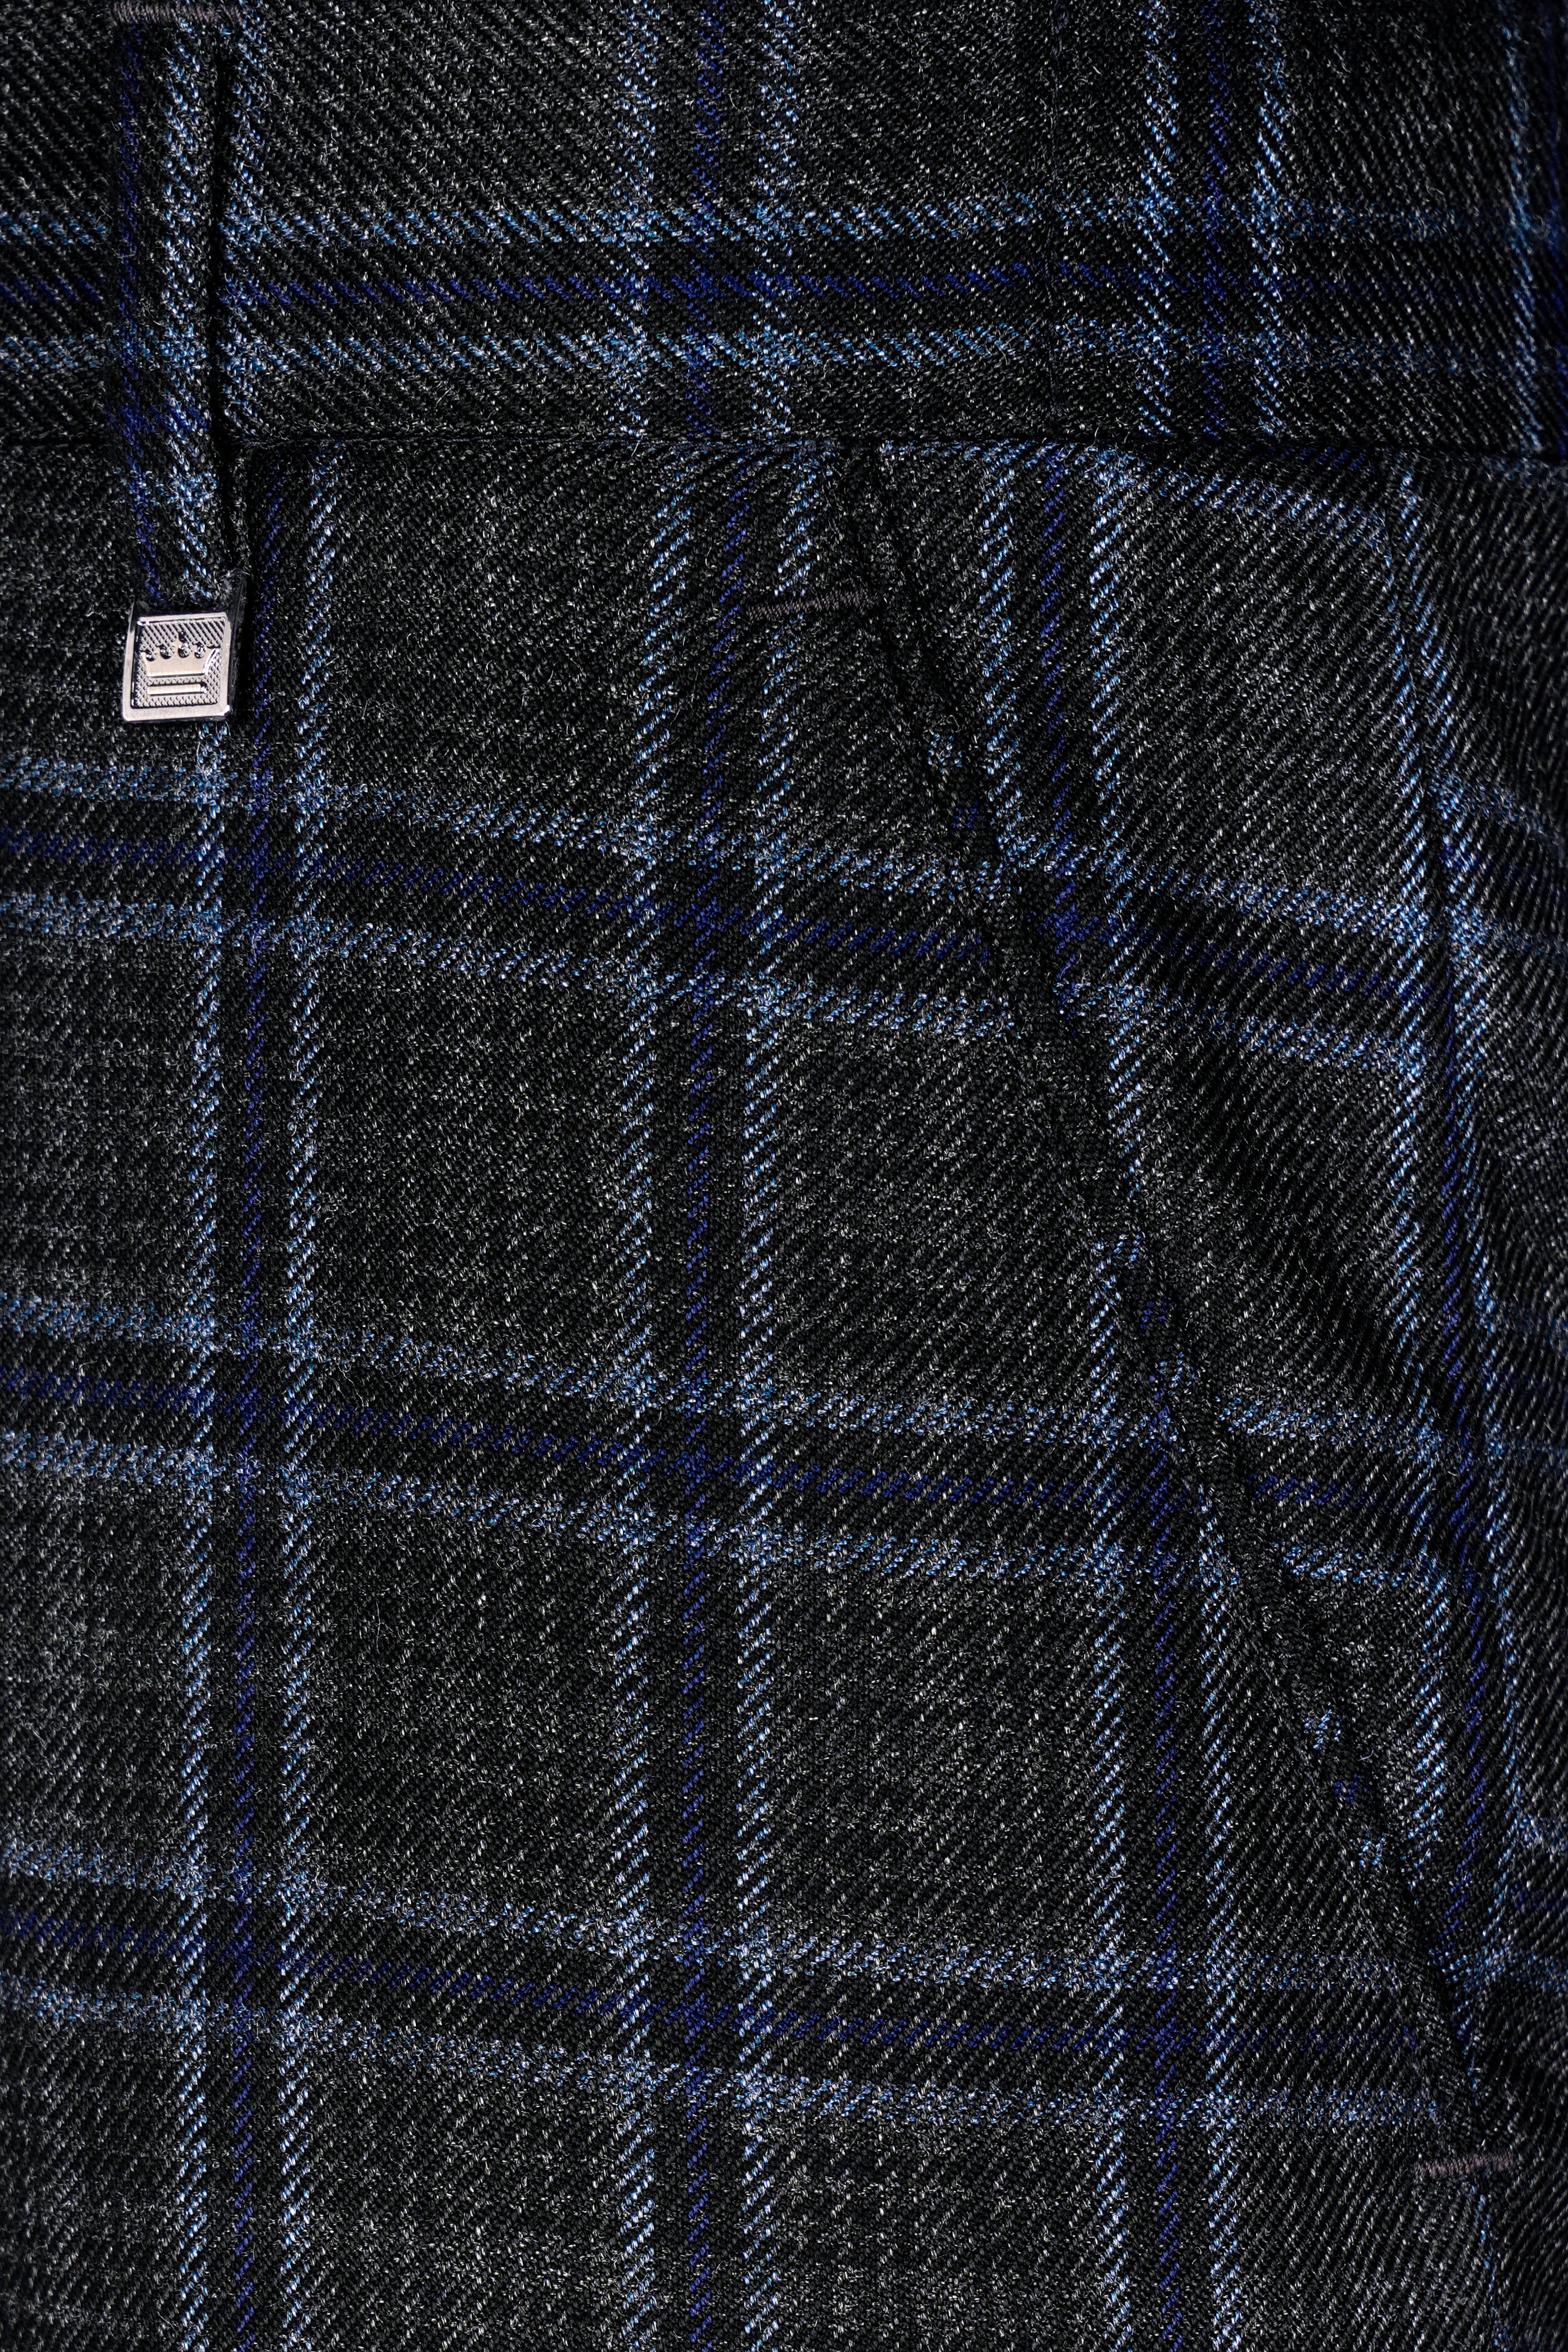 Bleached Black and Marine Blue Plaid Double Breasted Tweed Suit ST2907-DB-36, ST2907-DB-38, ST2907-DB-40, ST2907-DB-42, ST2907-DB-44, ST2907-DB-46, ST2907-DB-48, ST2907-DB-50, ST2907-DB-52, ST2907-DB-54, ST2907-DB-56, ST2907-DB-58, ST2907-DB-60